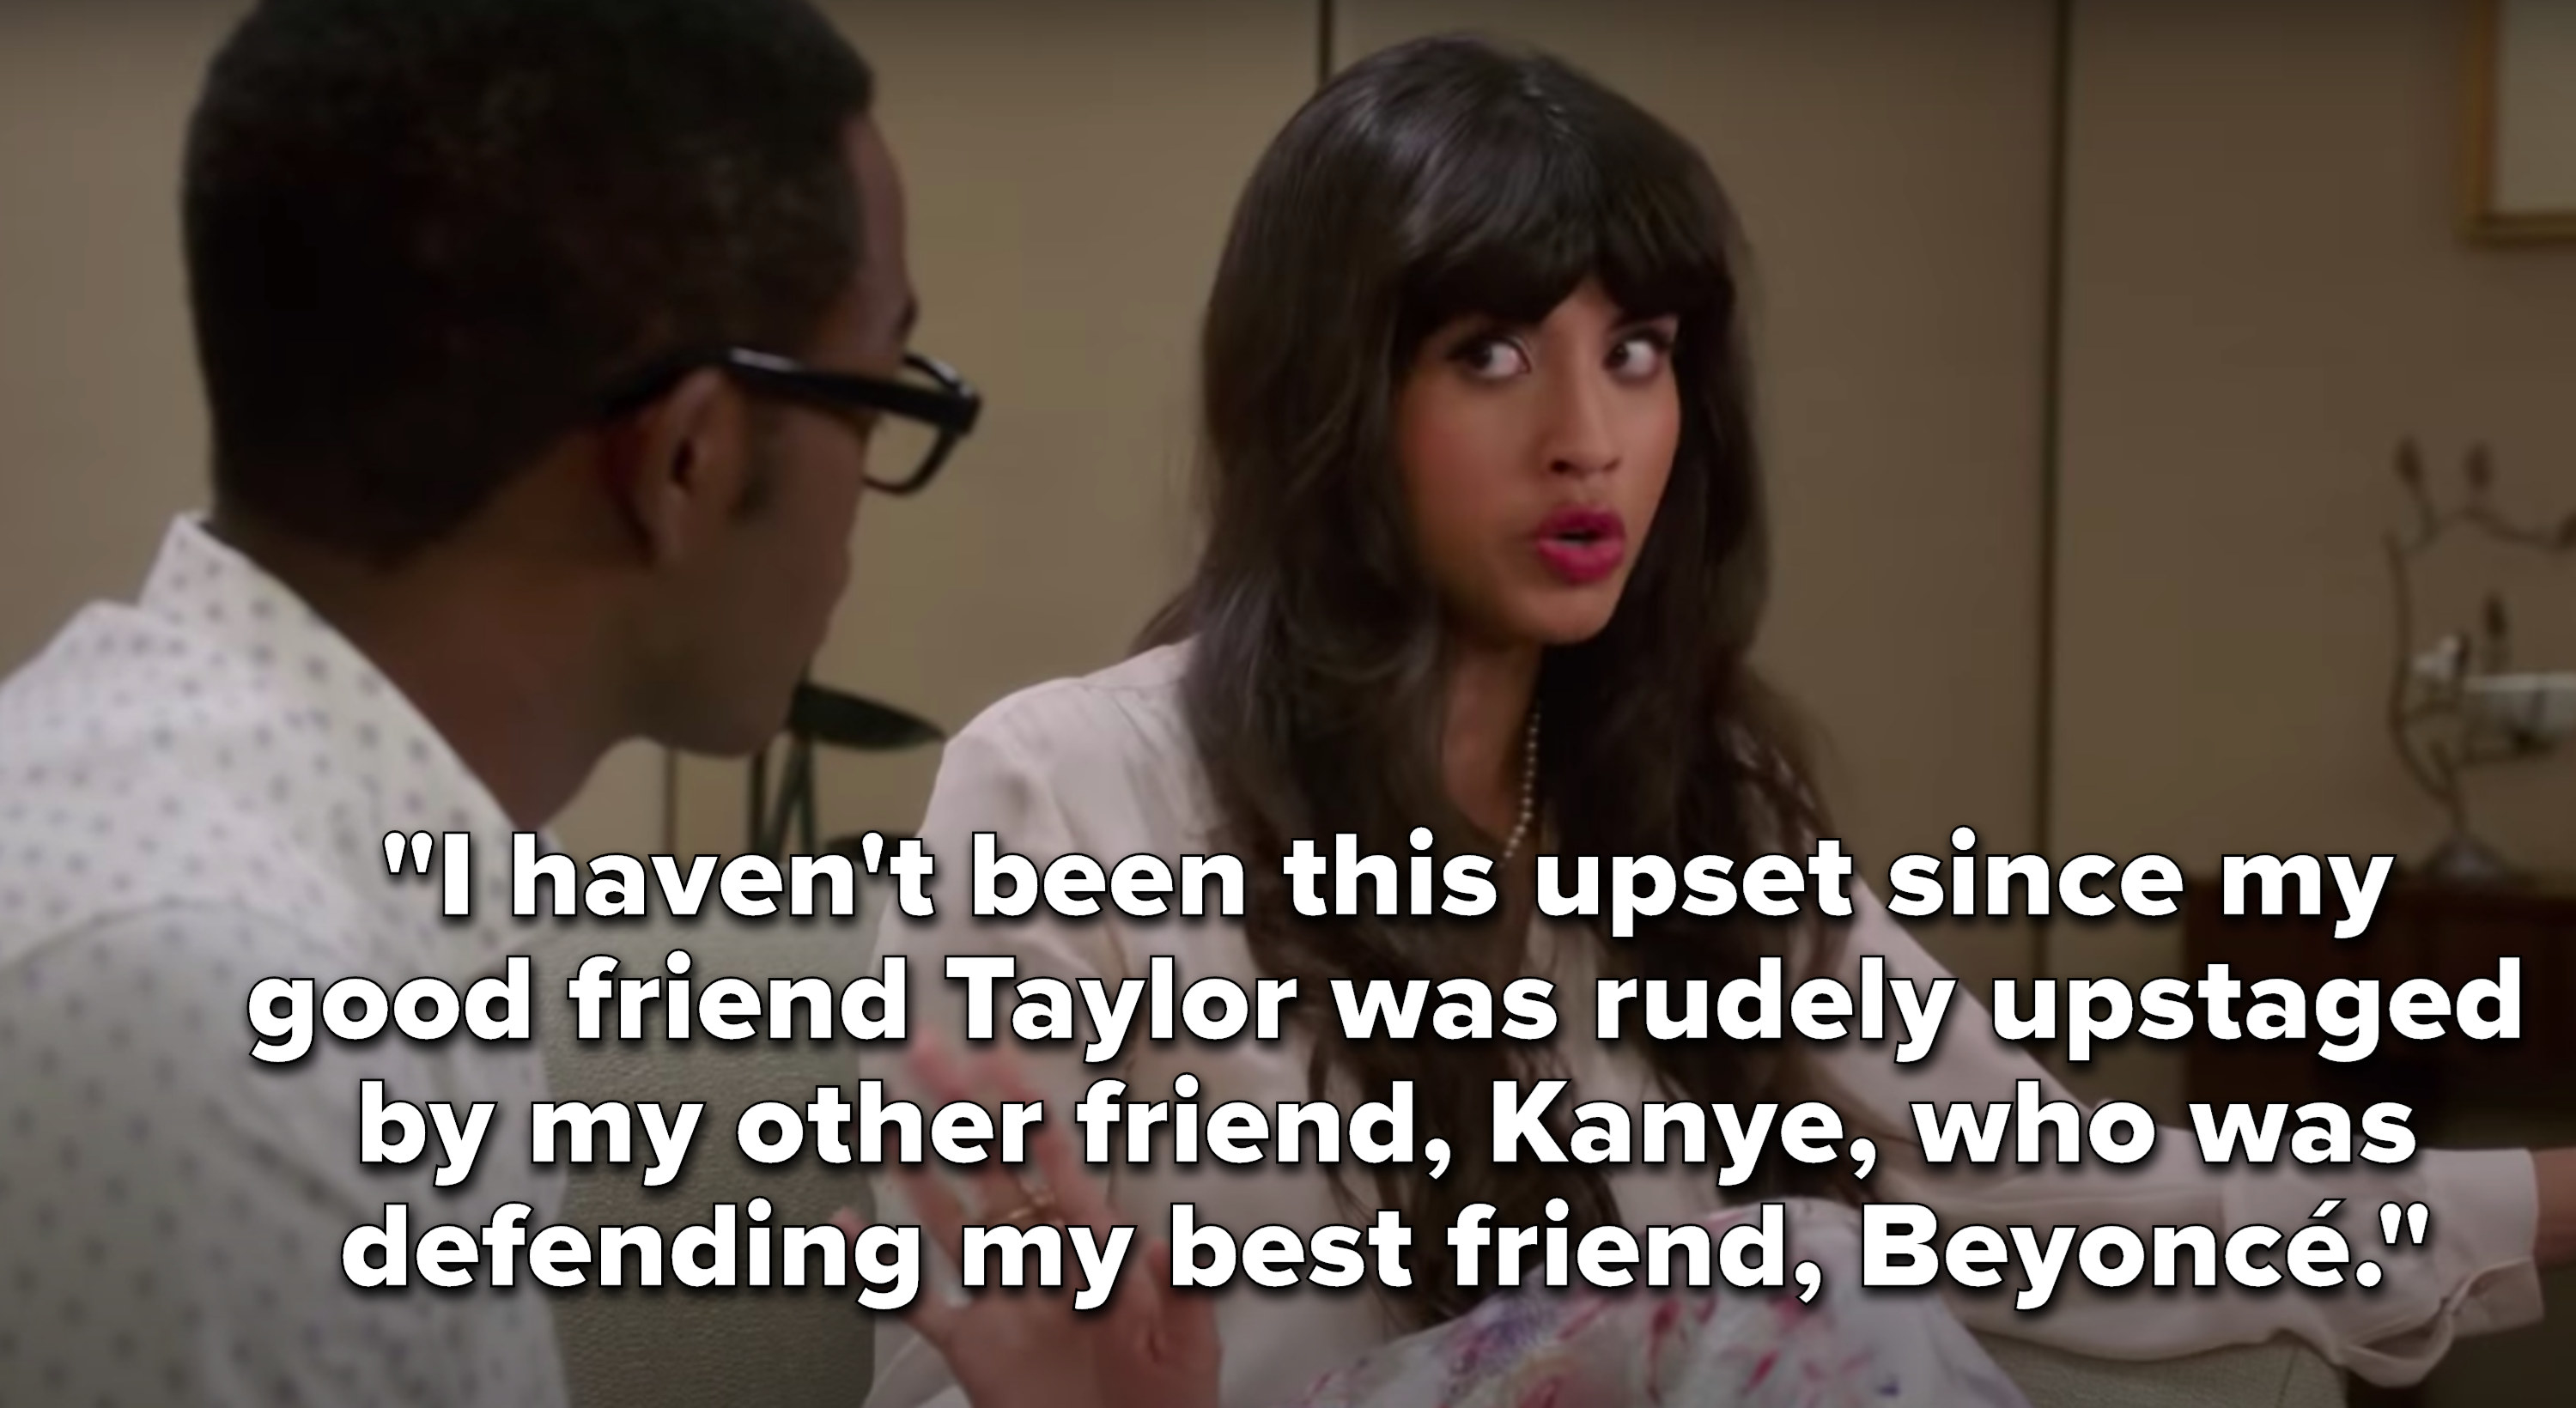 Tahani says, I haven&#x27;t been this upset since my good friend Taylor was rudely upstaged by my other friend, Kanye, who was defending my best friend, Beyoncé